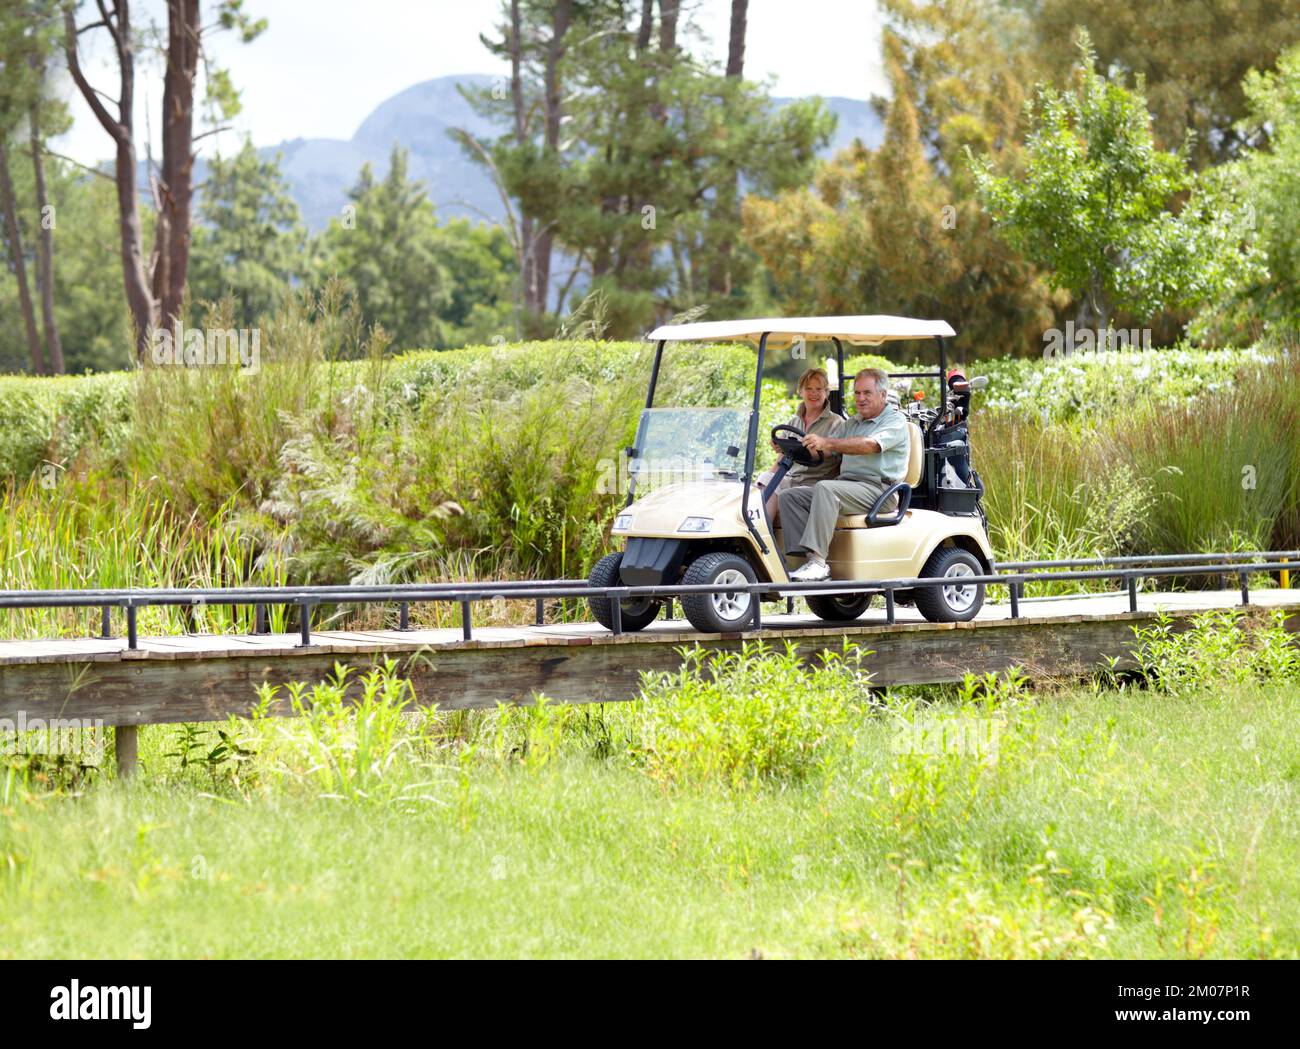 The benefits of being a club member. A mature couple driving a golf cart to their next hole during a game of golf. Stock Photo